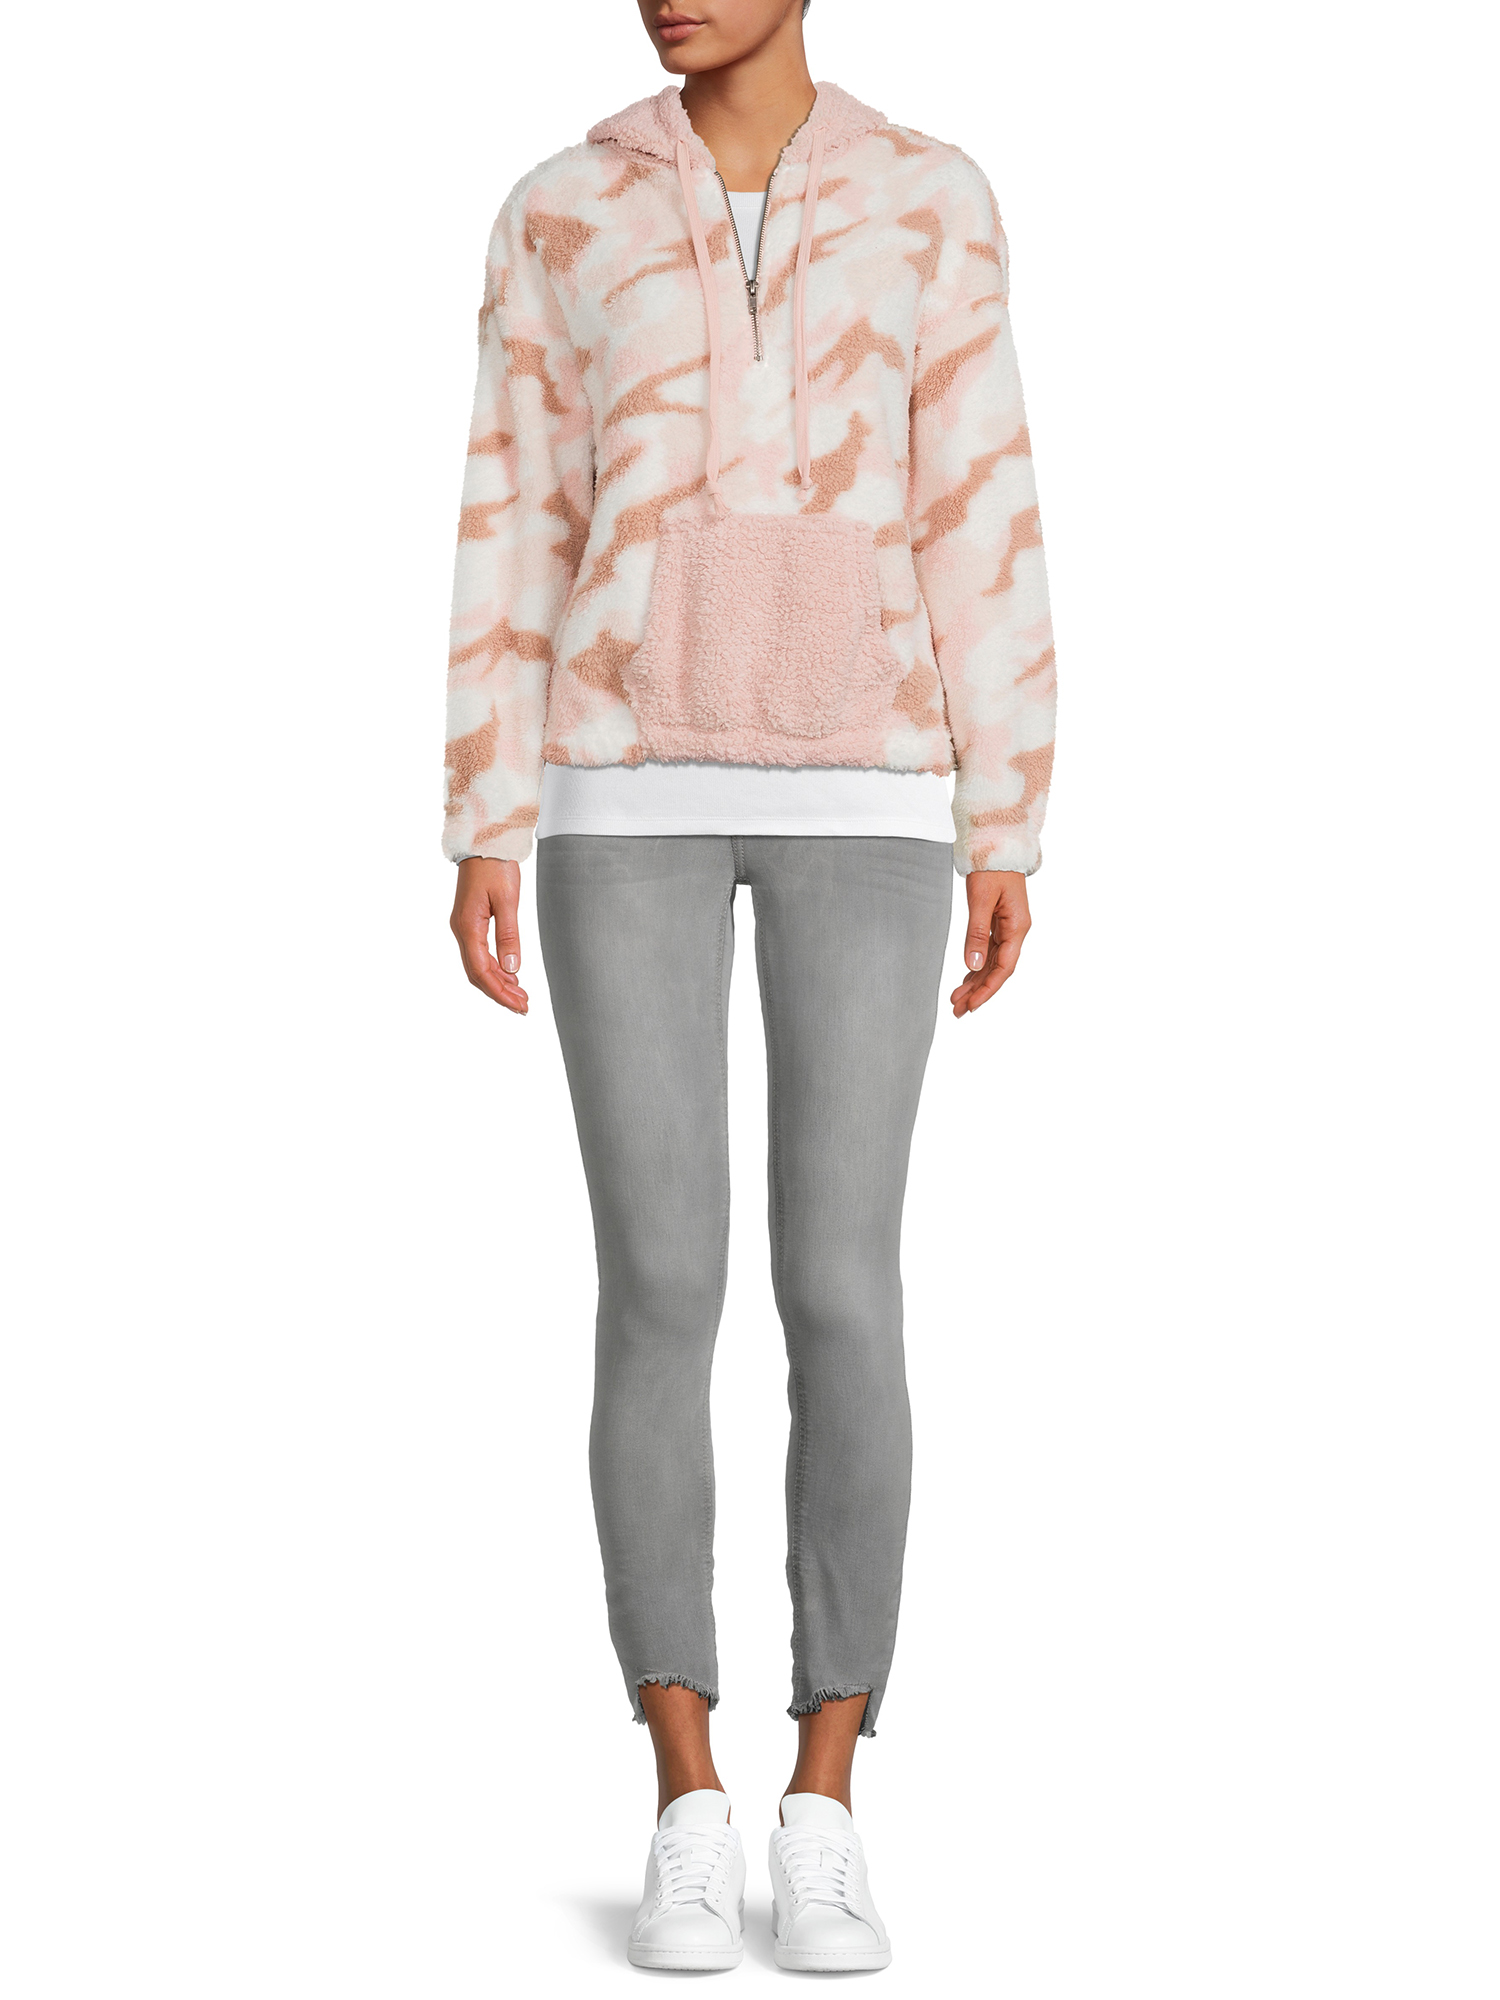 Como Blu Women's Athleisure Printed Baby Faux Sherpa Pullover - image 2 of 5